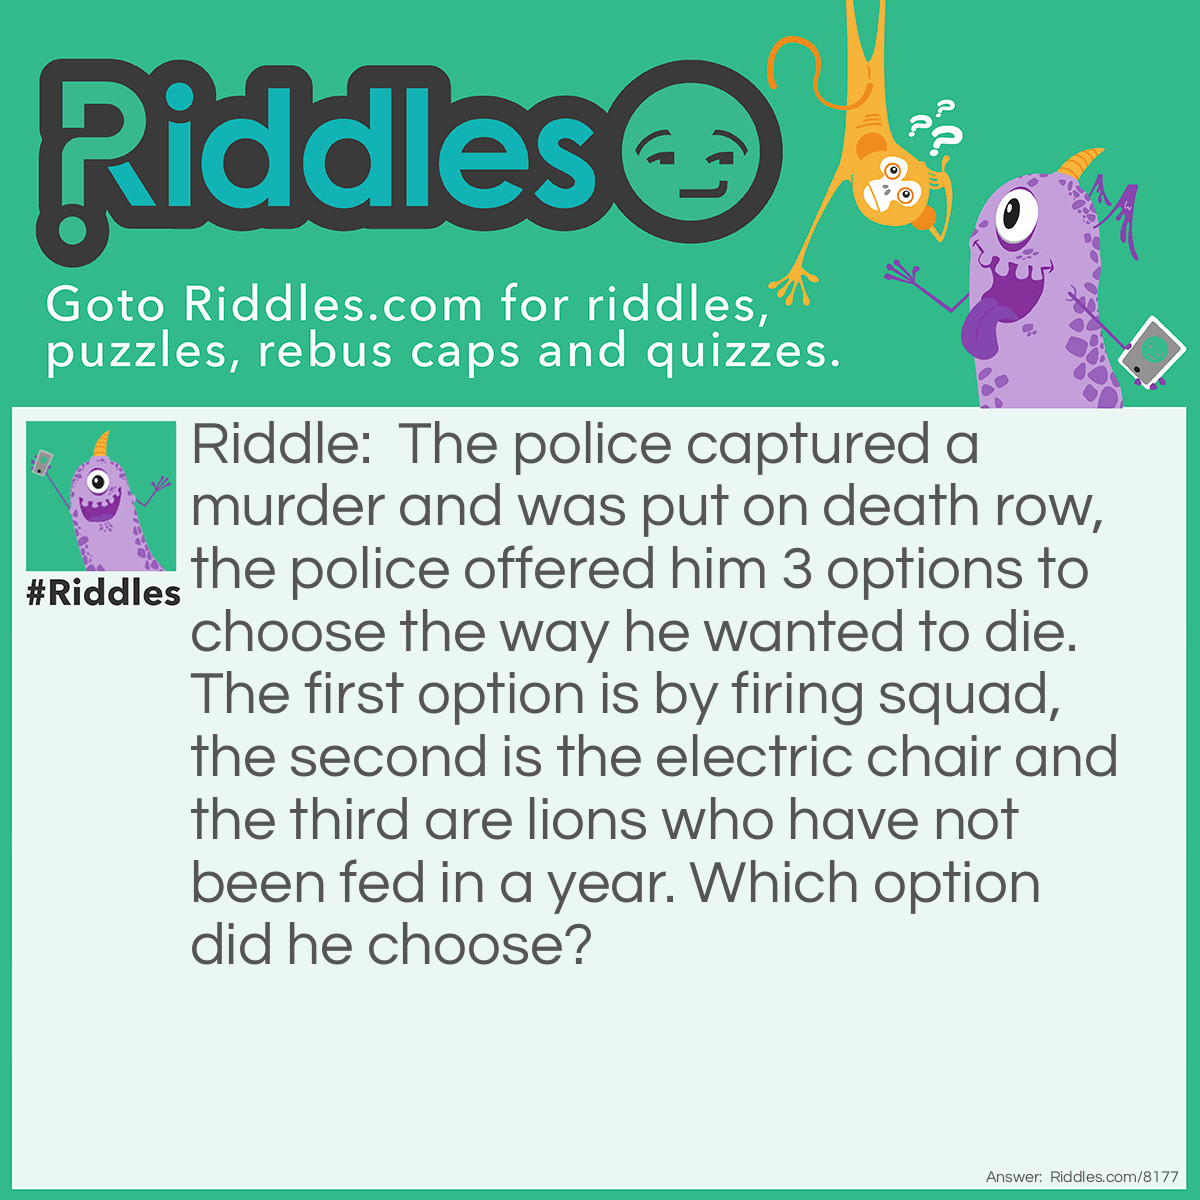 Riddle: The police captured a murder and was put on death row, the police offered him 3 options to choose the way he wanted to die. The first option is by firing squad, the second is the electric chair and the third are lions who have not been fed in a year. Which option did he choose? Answer: He would choose the lions because the lions would die if they have not been fed in a year